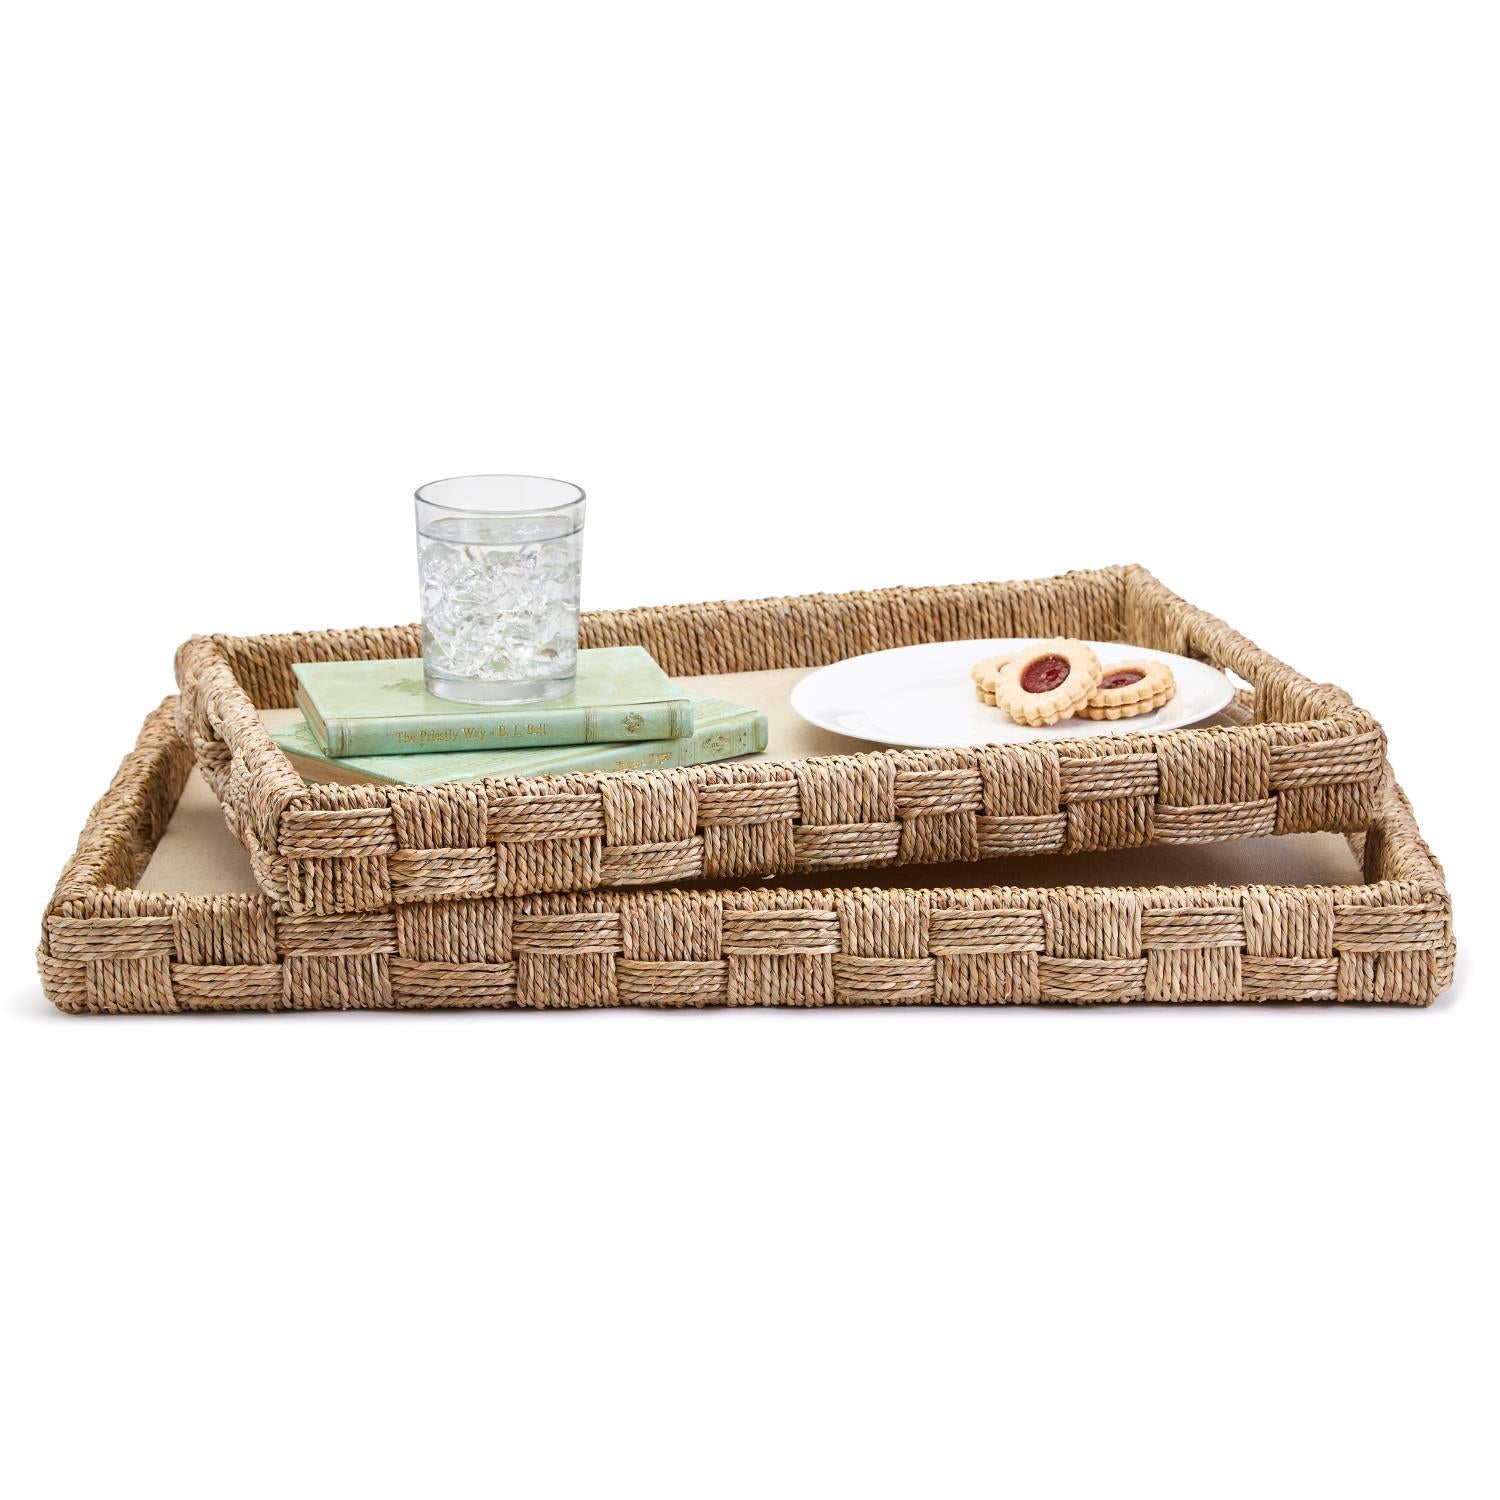 Two's Company S/2 Hand-Crafted Sea Grass and Rattan Oversized Decorative Square Trays